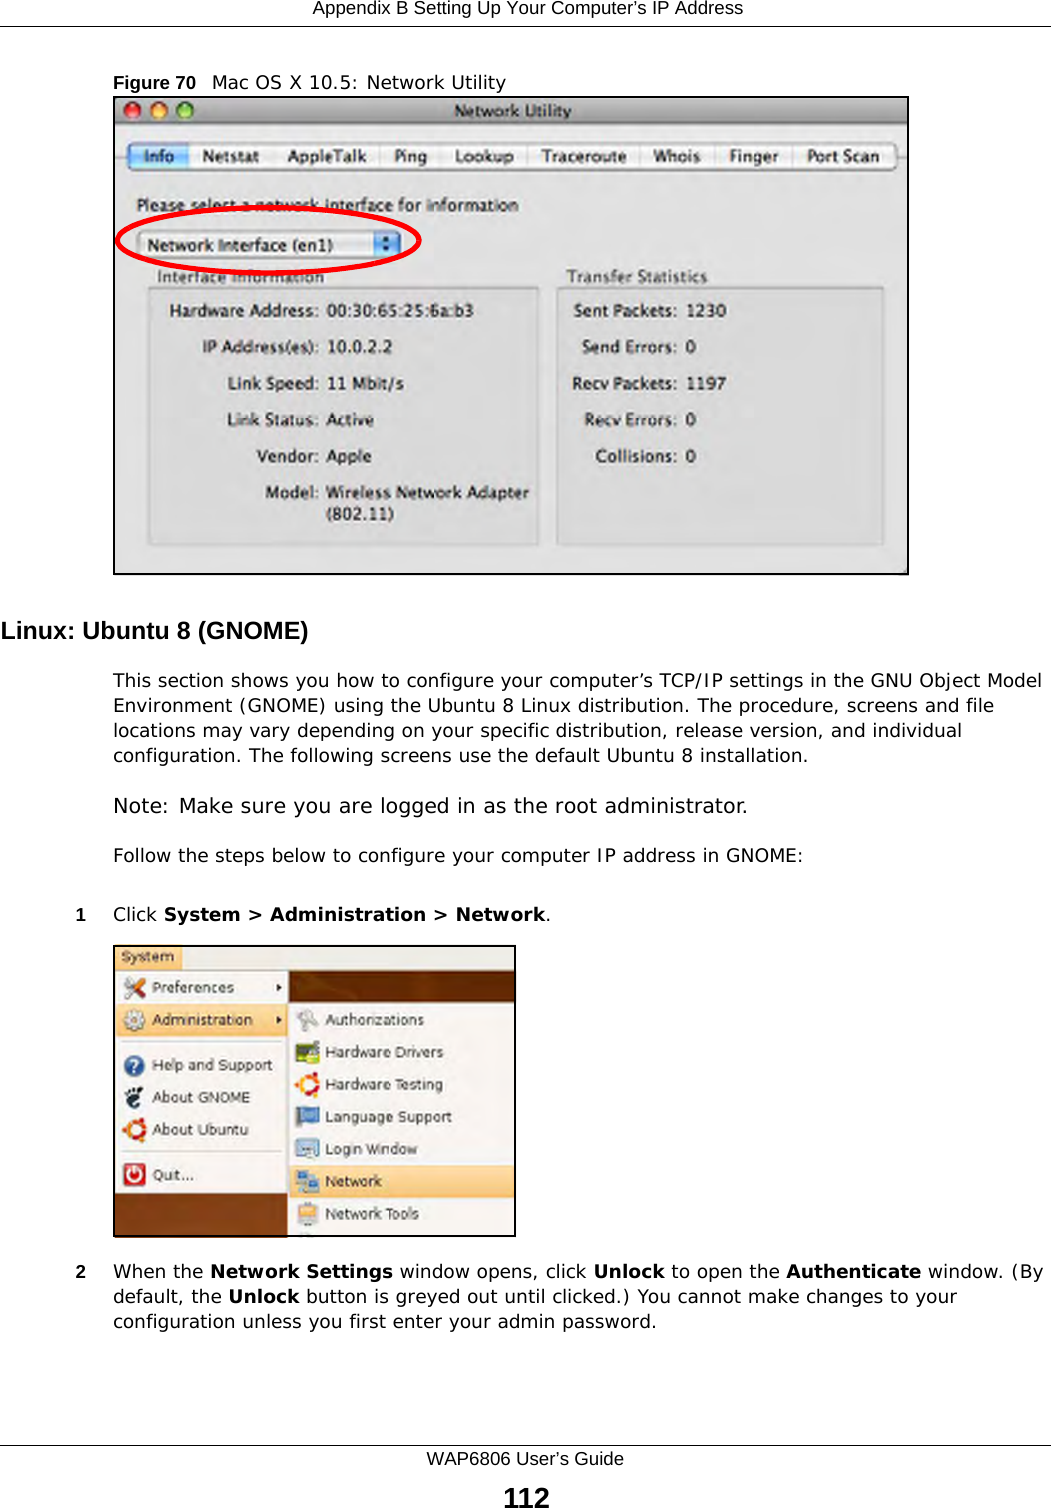  Appendix B Setting Up Your Computer’s IP AddressWAP6806 User’s Guide112Figure 70   Mac OS X 10.5: Network UtilityLinux: Ubuntu 8 (GNOME)This section shows you how to configure your computer’s TCP/IP settings in the GNU Object Model Environment (GNOME) using the Ubuntu 8 Linux distribution. The procedure, screens and file locations may vary depending on your specific distribution, release version, and individual configuration. The following screens use the default Ubuntu 8 installation.Note: Make sure you are logged in as the root administrator. Follow the steps below to configure your computer IP address in GNOME: 1Click System &gt; Administration &gt; Network.2When the Network Settings window opens, click Unlock to open the Authenticate window. (By default, the Unlock button is greyed out until clicked.) You cannot make changes to your configuration unless you first enter your admin password.